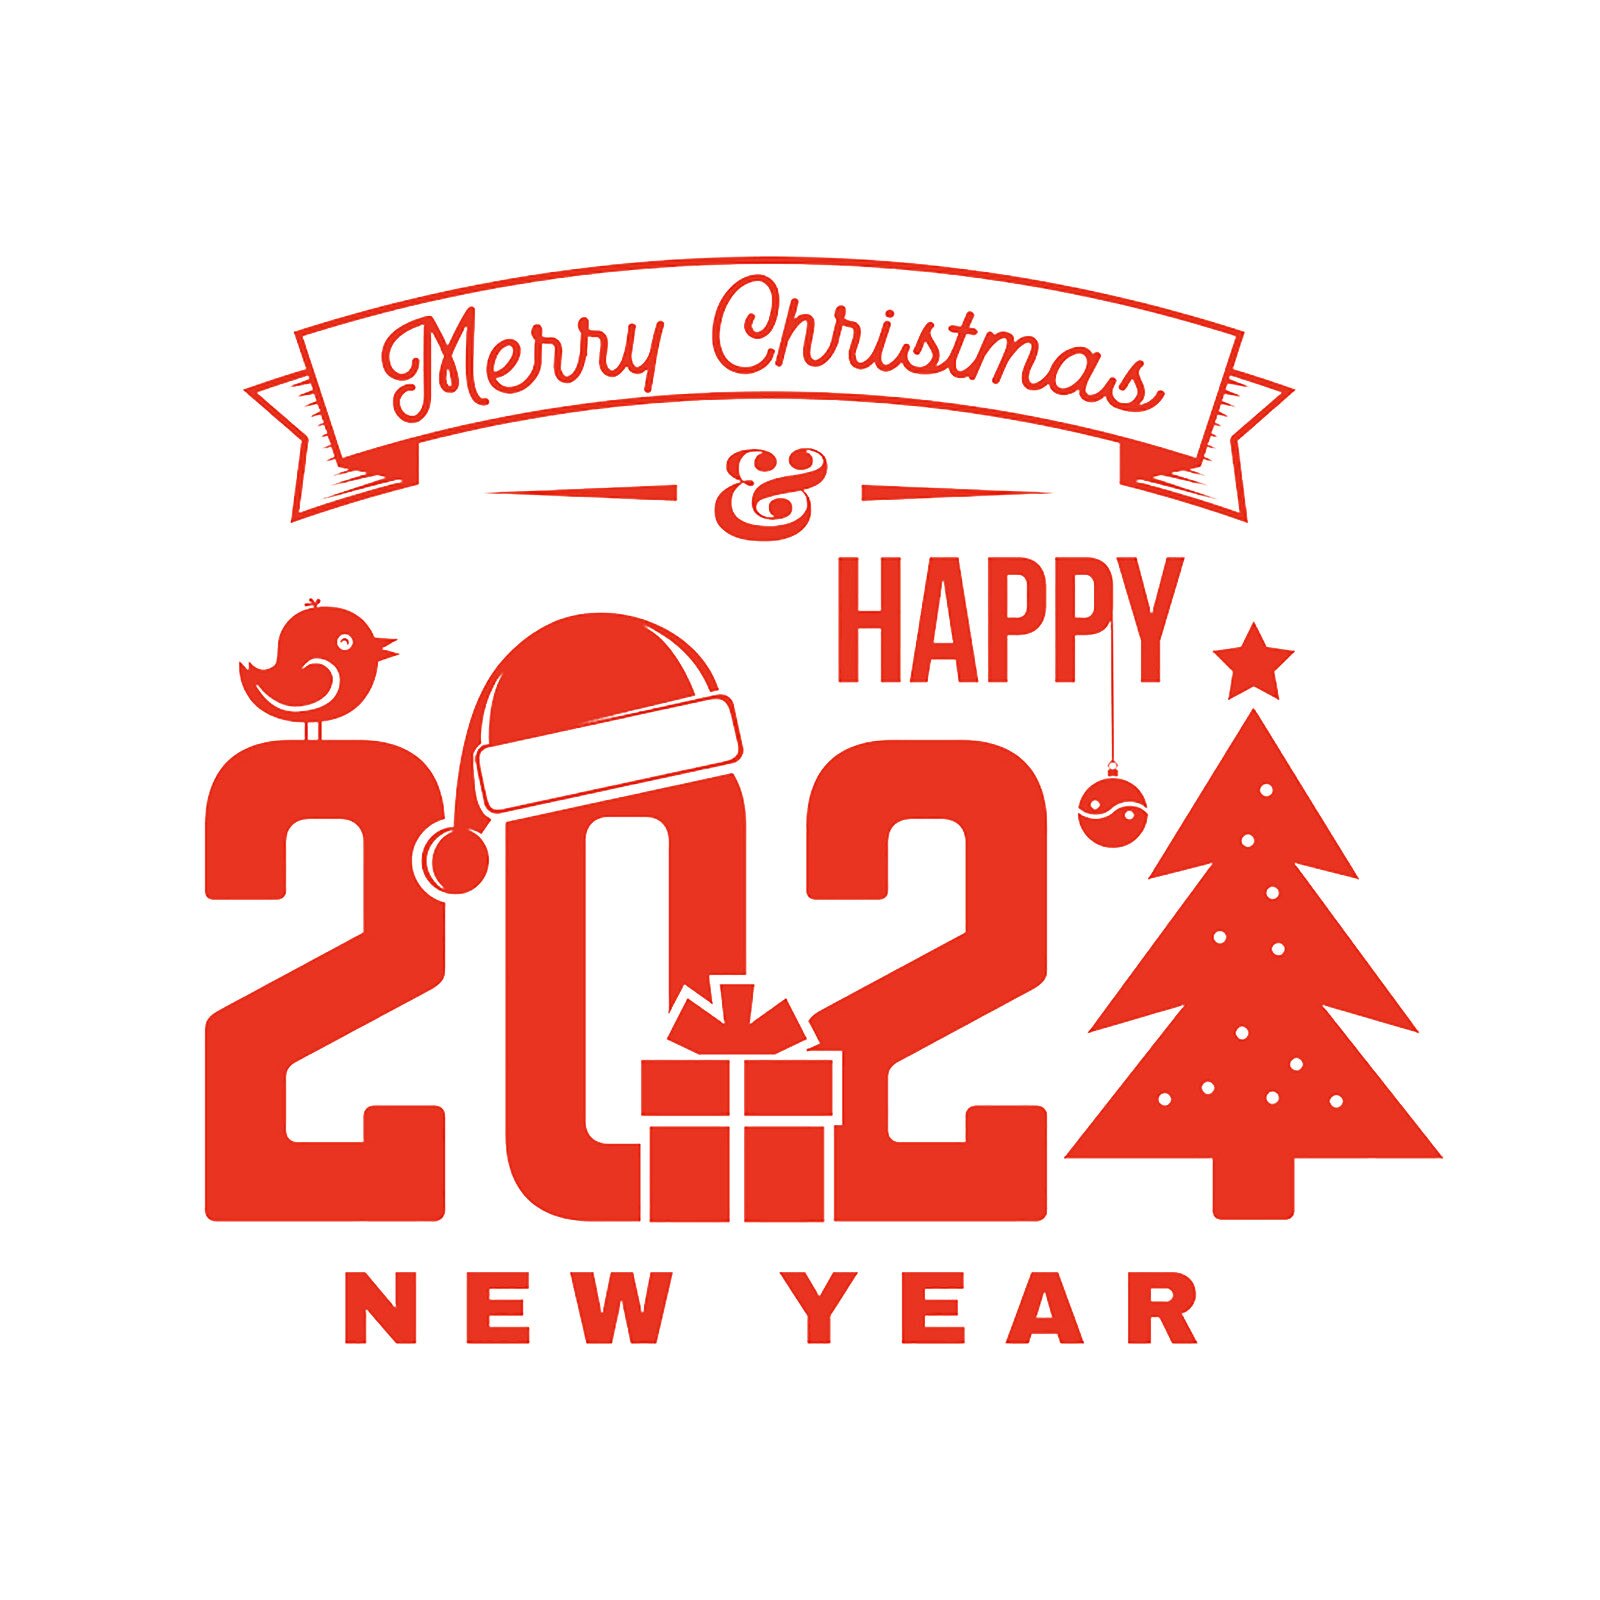 DIY Merry Christmas Wall Stickers Window Glass Stickers Christmas Decorations For Home Christmas Ornaments Xmas Year: Red